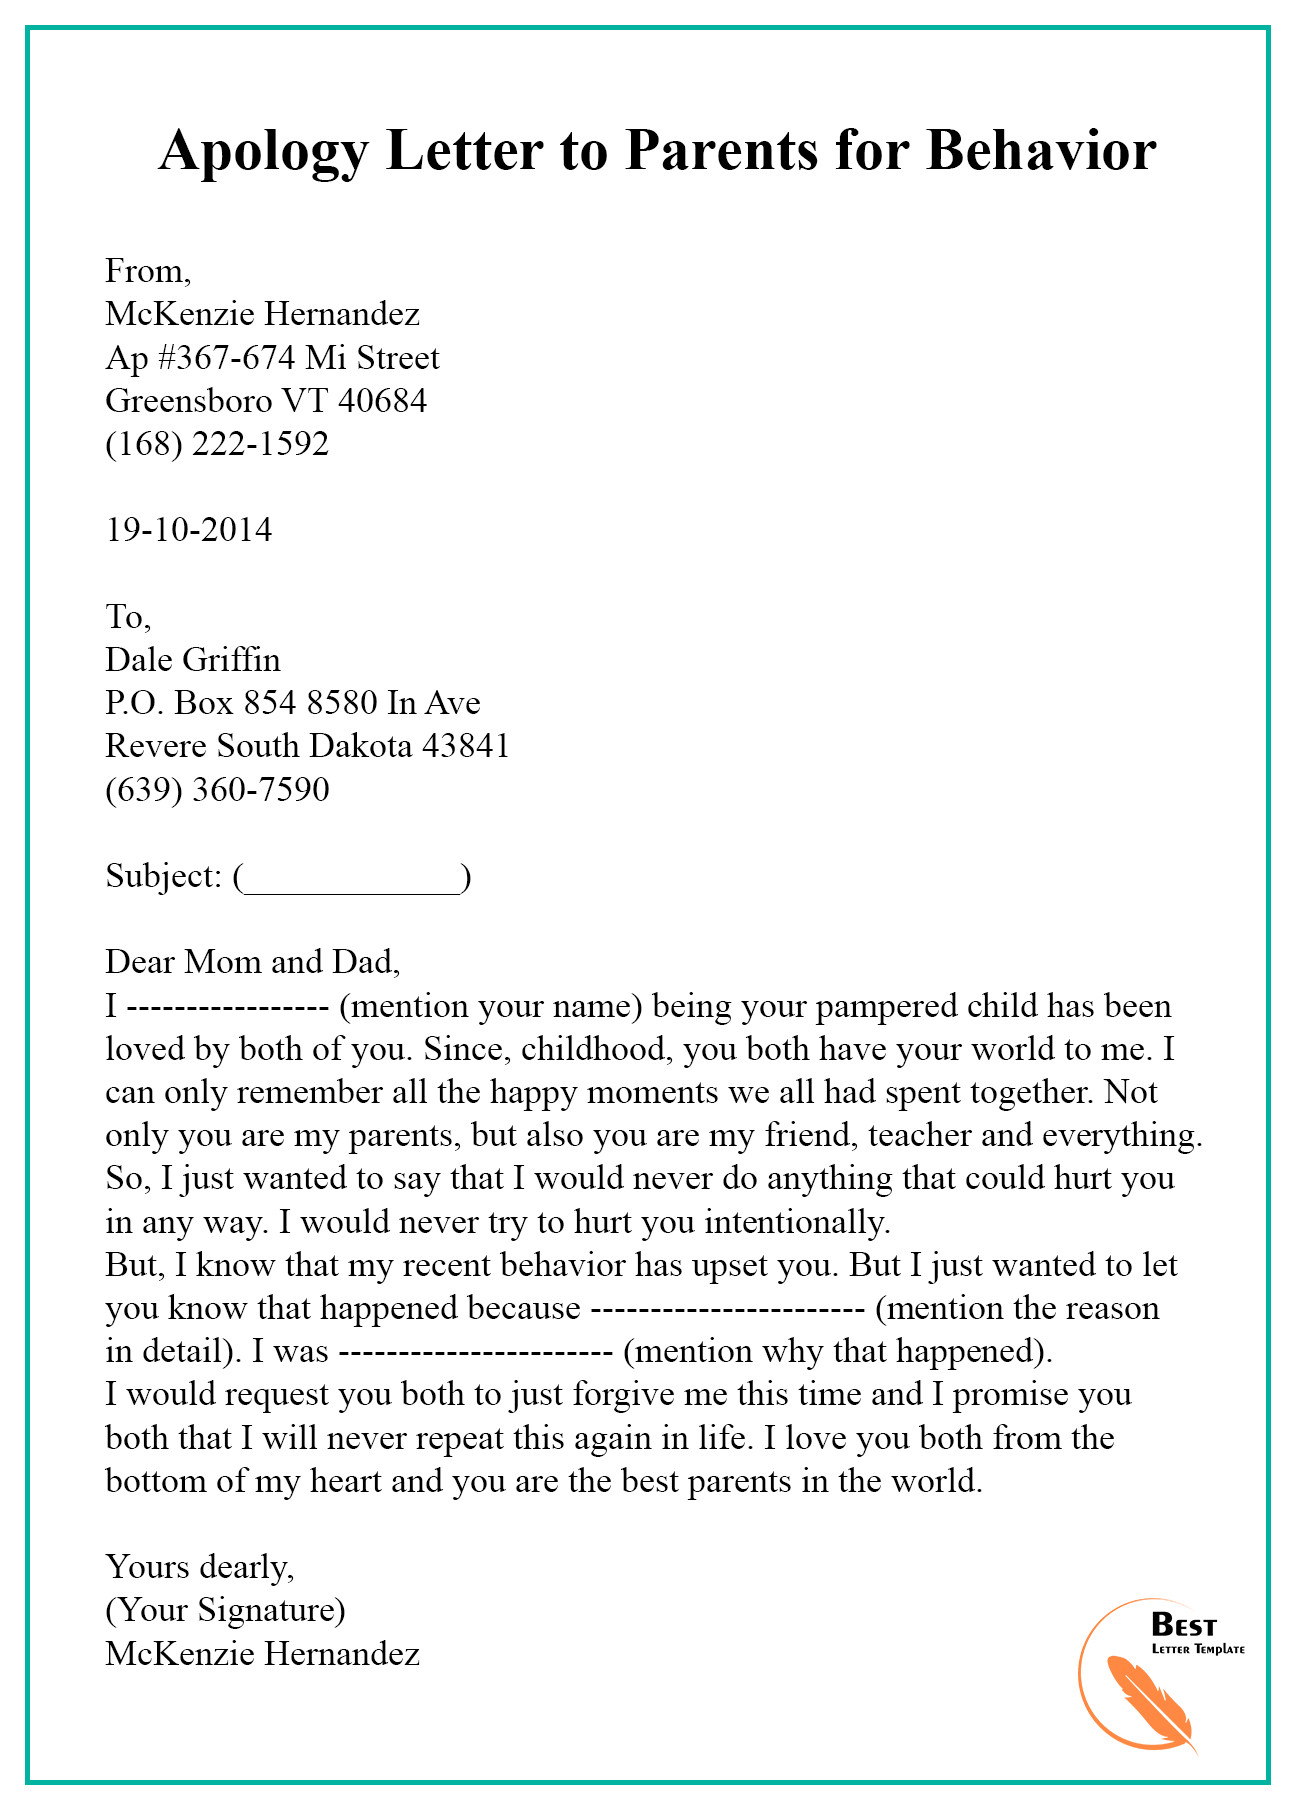 Letters to Parents Template Apology Letter to Parents for Behavior – Best Letter Template